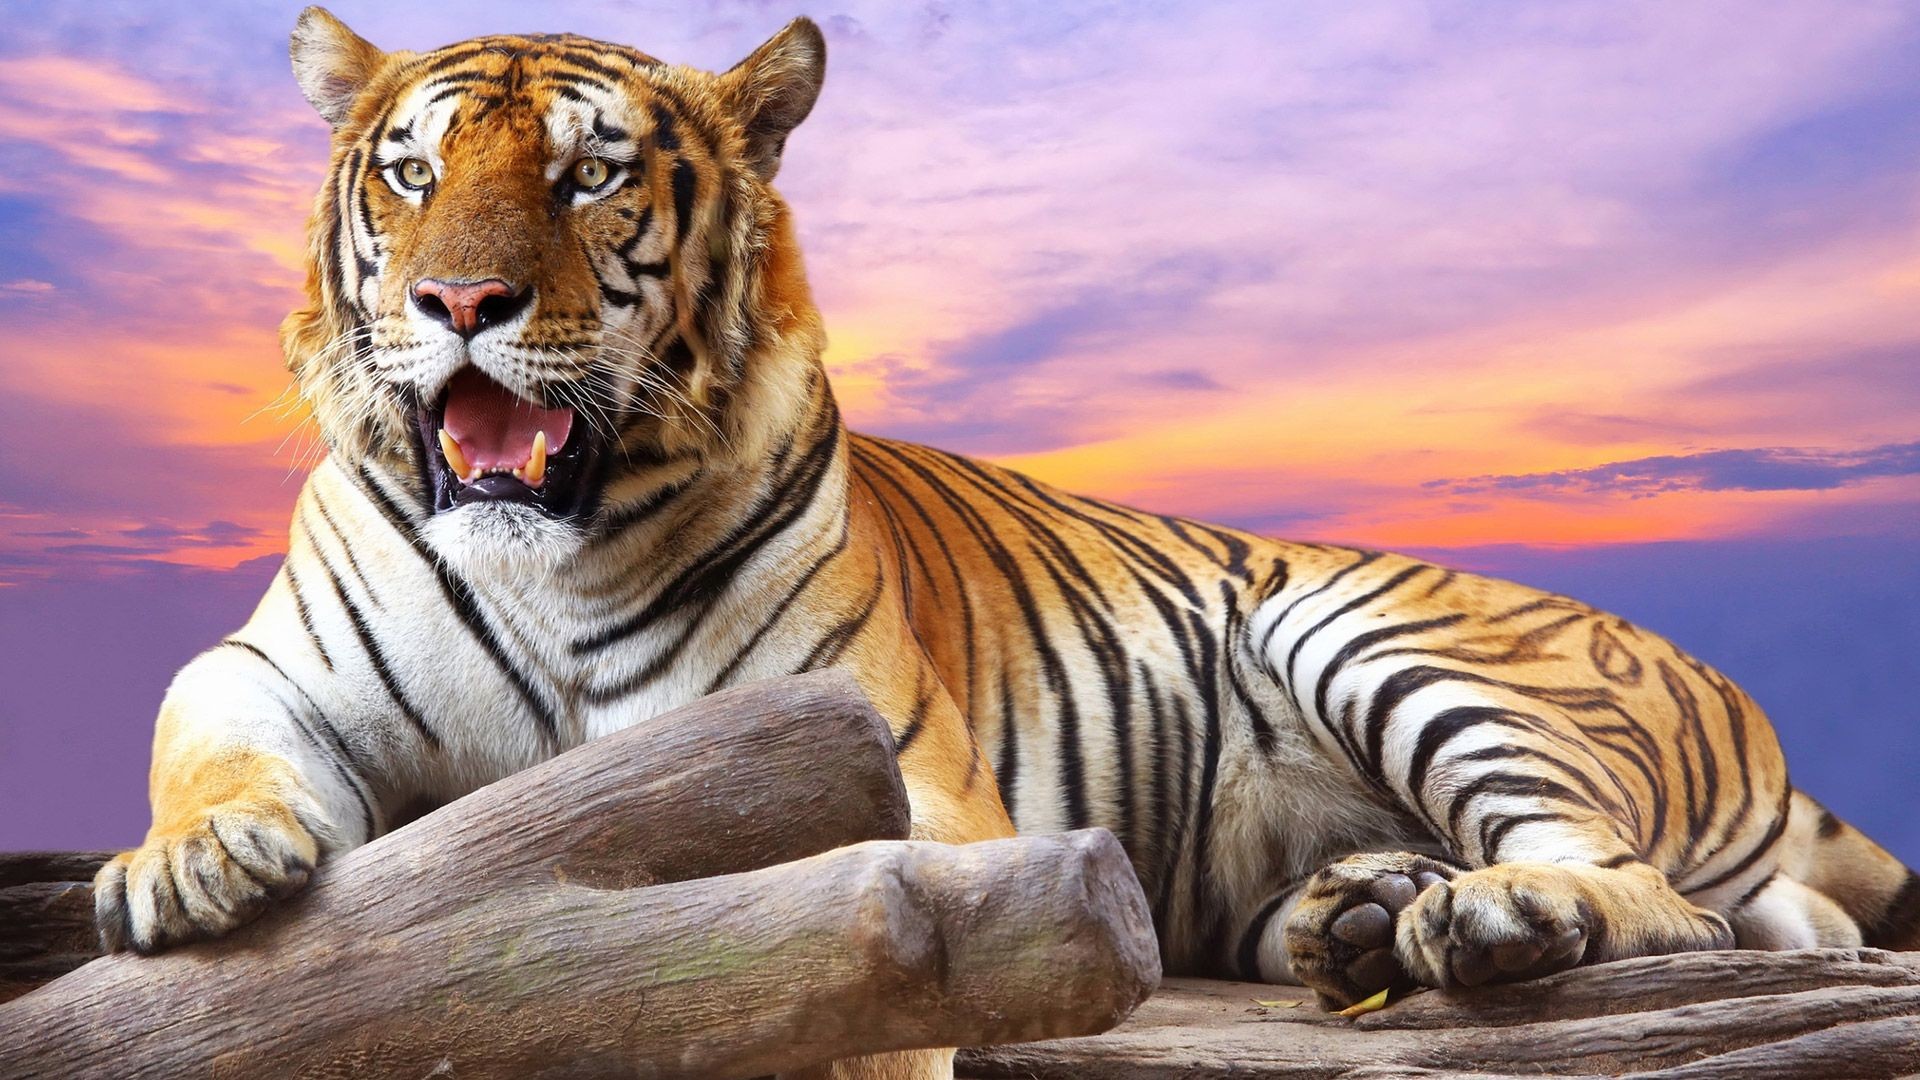 1920x1080 Wild Tiger in mood wallpapers – Free full hd wallpapers for 1080p .